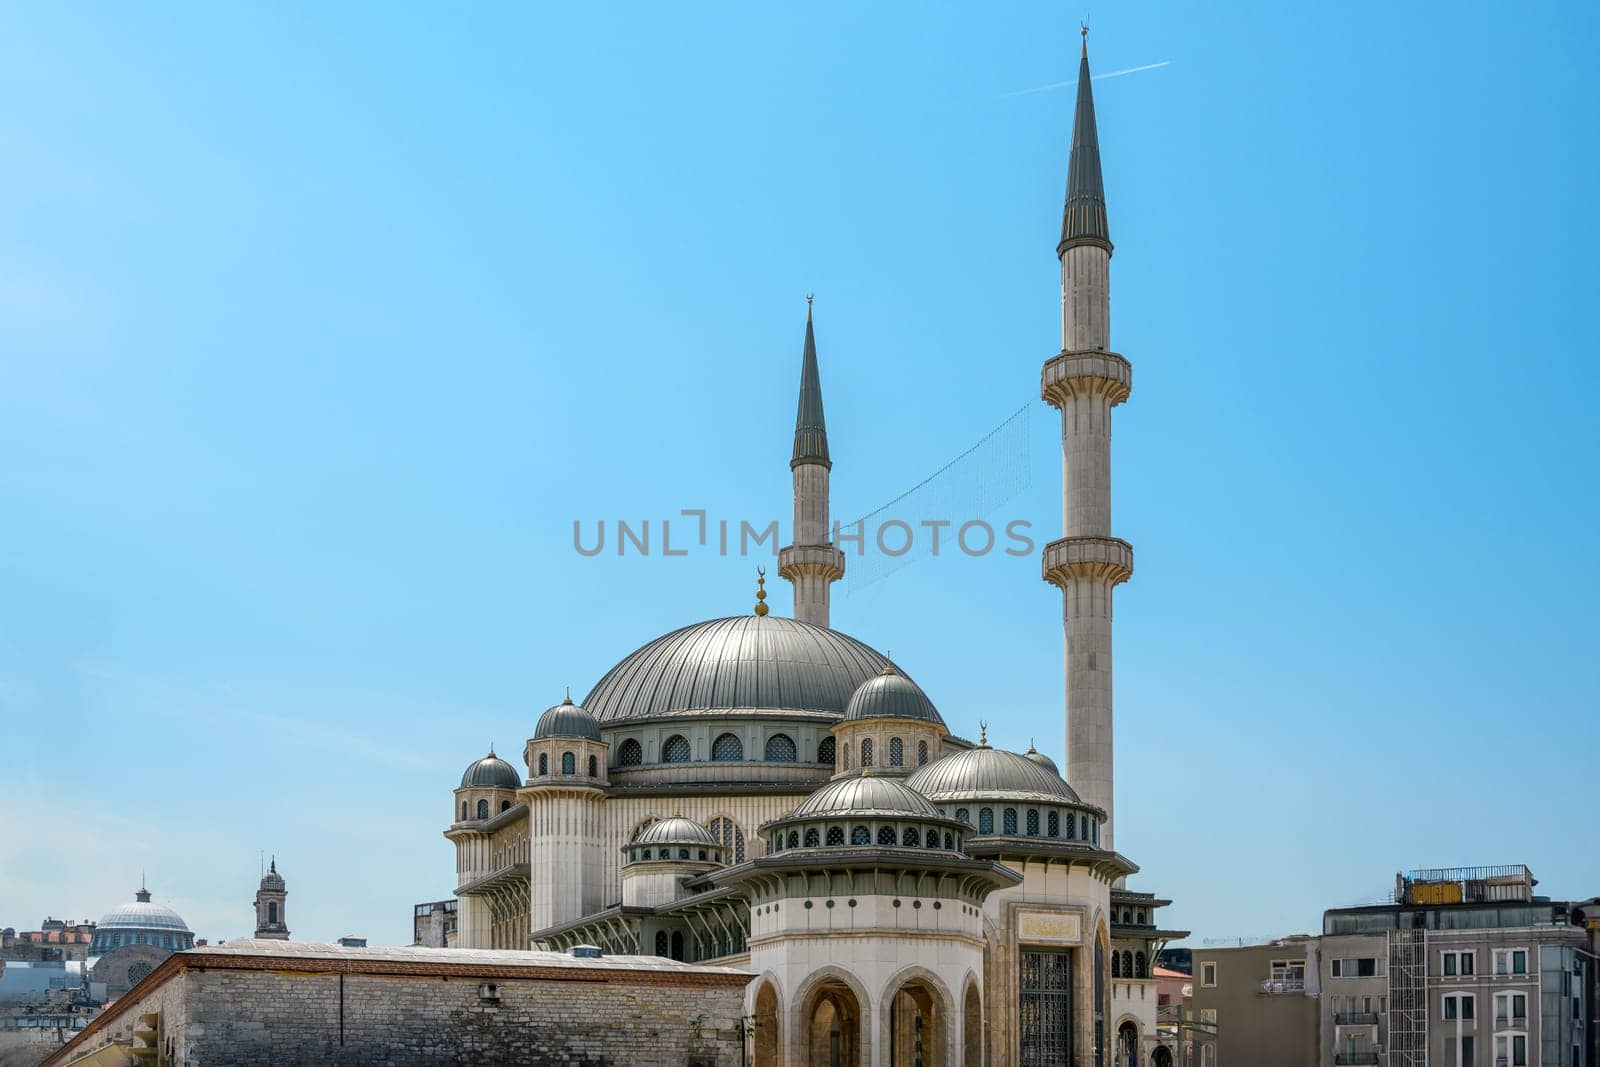 Taksim Mosque in Taksim Square in Istanbul on a sunny day